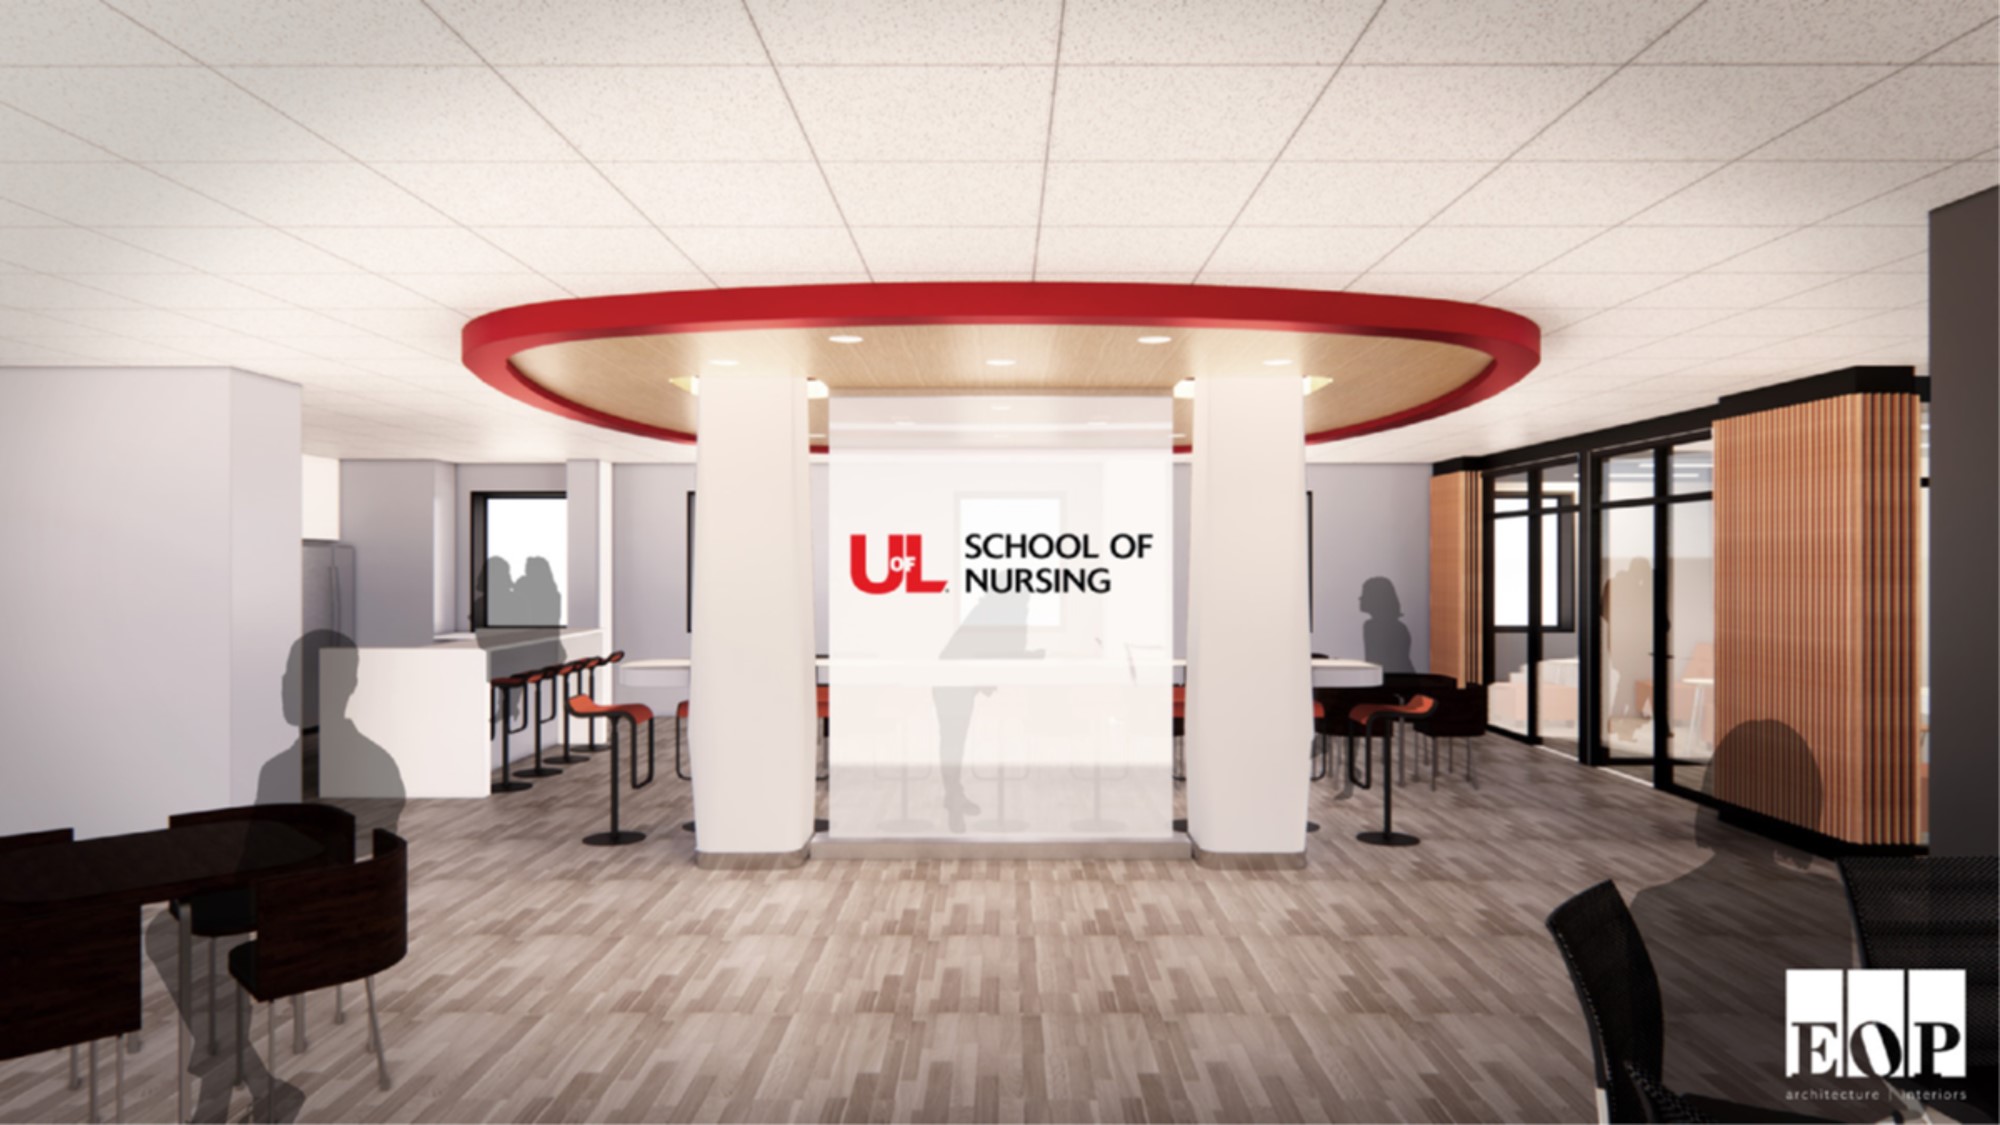 Simulated rendering of the School of Nursing’s Student Collaboration Lounge featuring the School of Nursing logo on a frosted glass pane between two round columns.